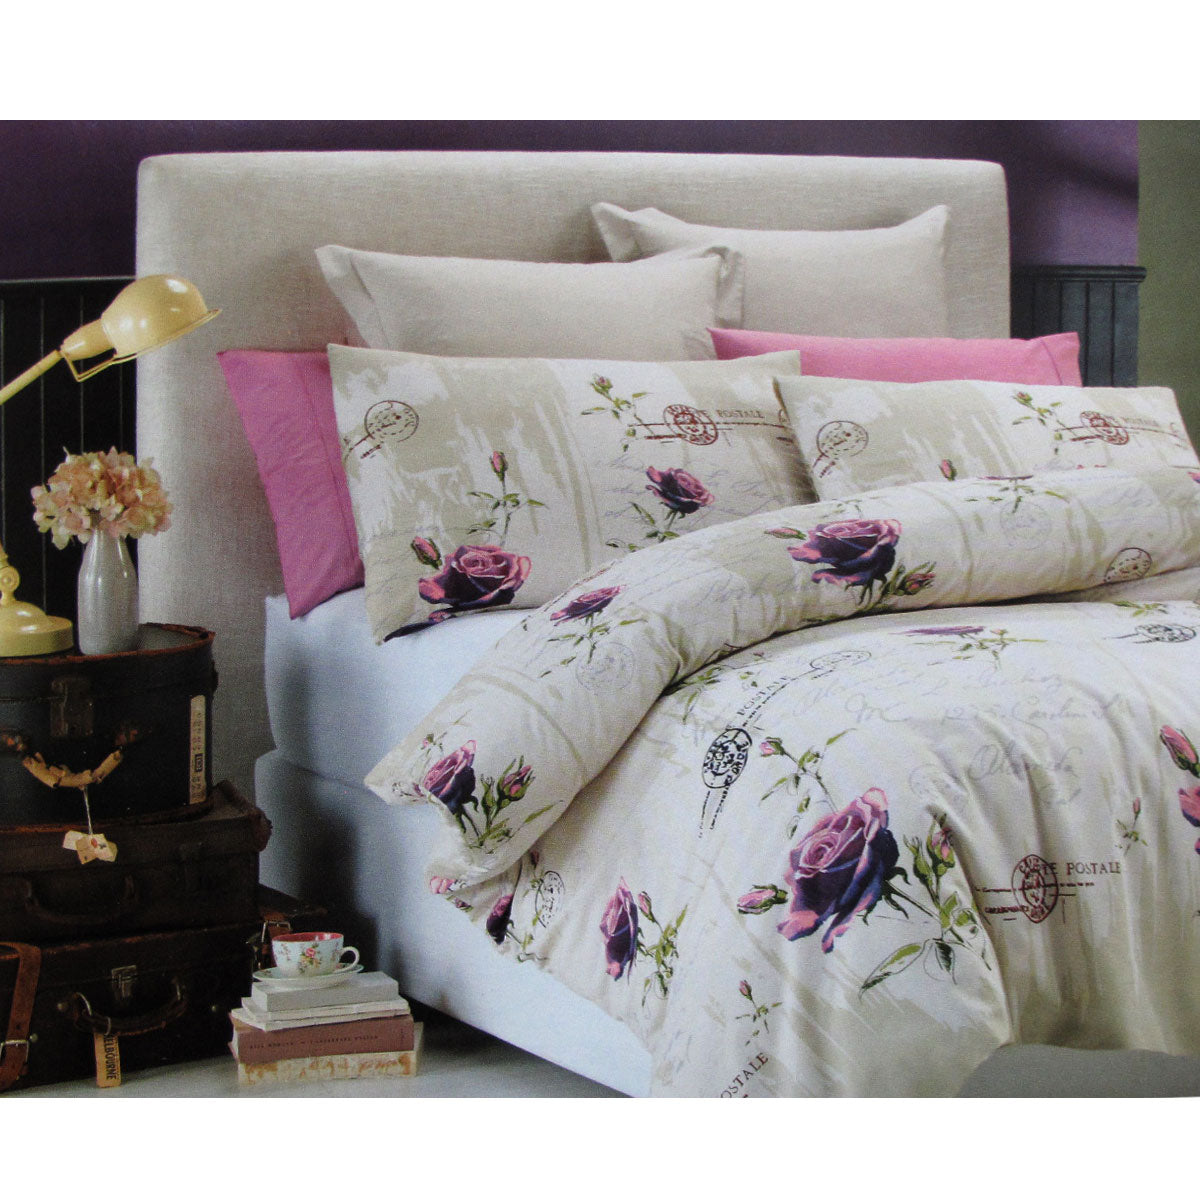 Belmondo French Rose Easy Care Quilt Cover Set Queen - Newstart Furniture